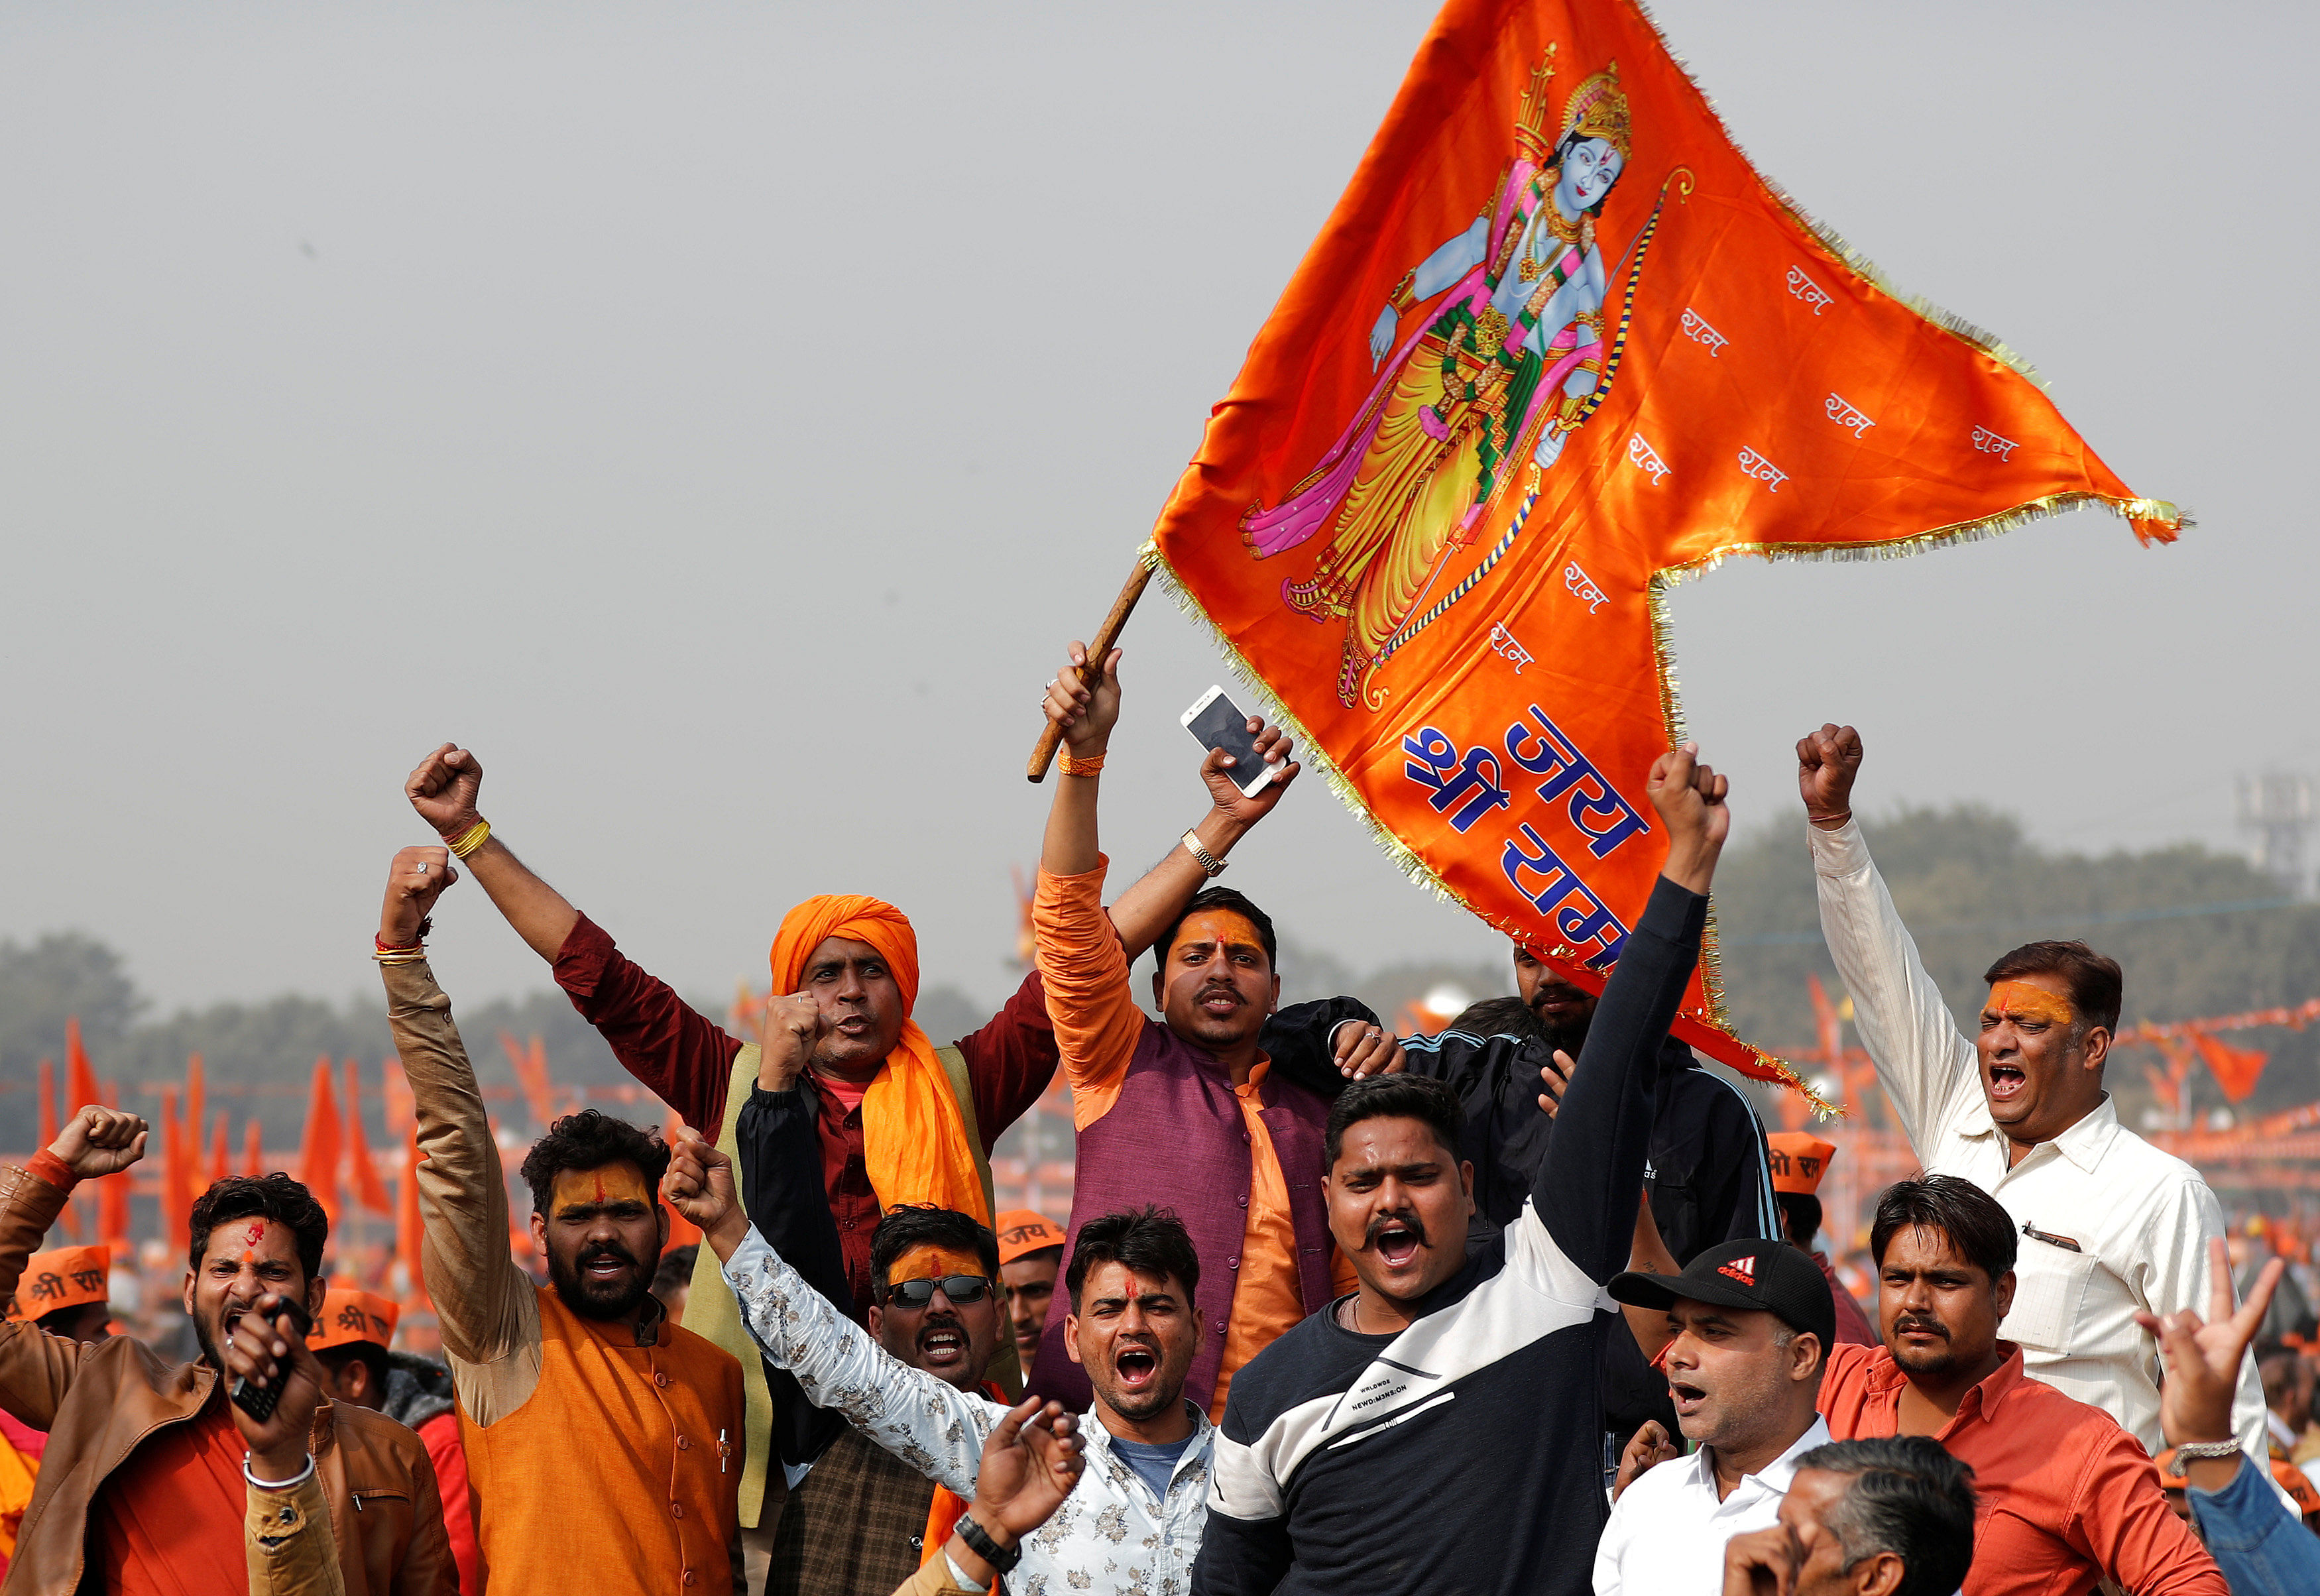 In 2013, VHP's official Facebook page was hacked with its leaders then claiming that "malicious religious and political" material were posted. Credit: Reuters Photo